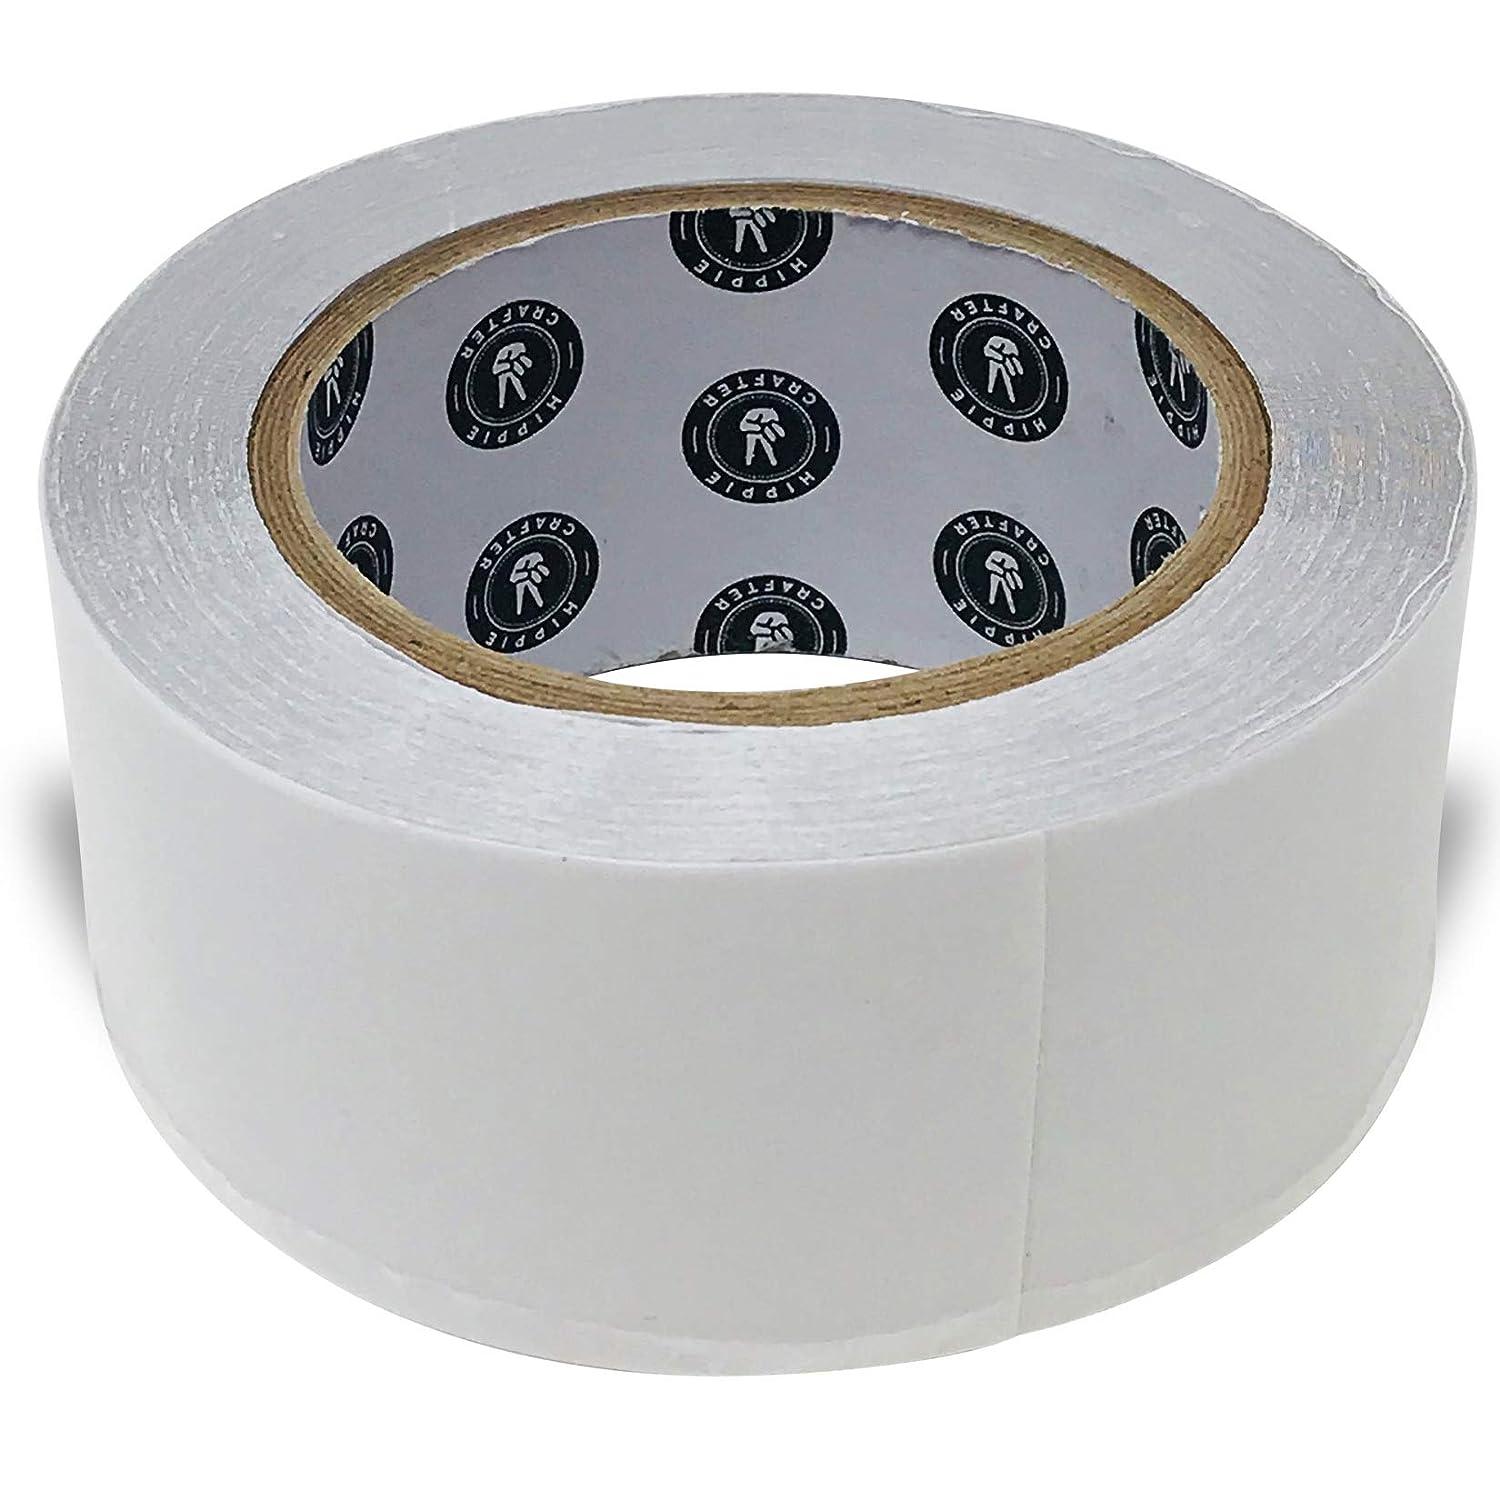 Clear Double Sided Tape for Crafts 2 inch Wide Heavy Duty Adhesive Tape Two  Side Strong Sticky Thin Heavy Duty Mounting for Poster Carpet Wall Safe  Doublesided Stick - 90FT x 2